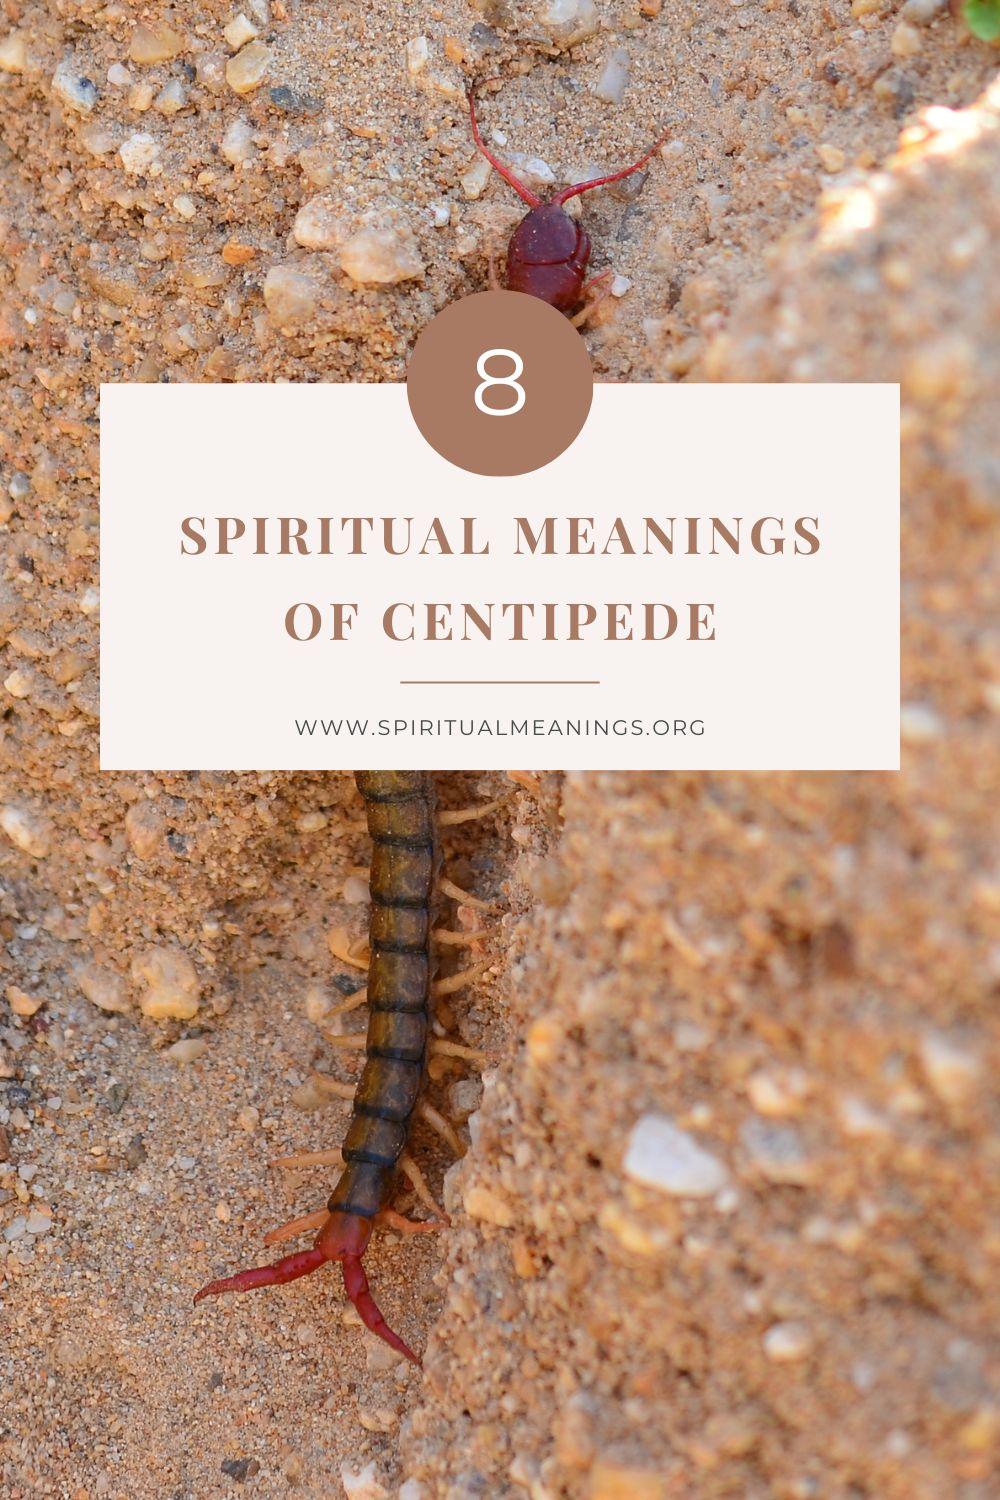 The Spiritual Meaning of the Centipede